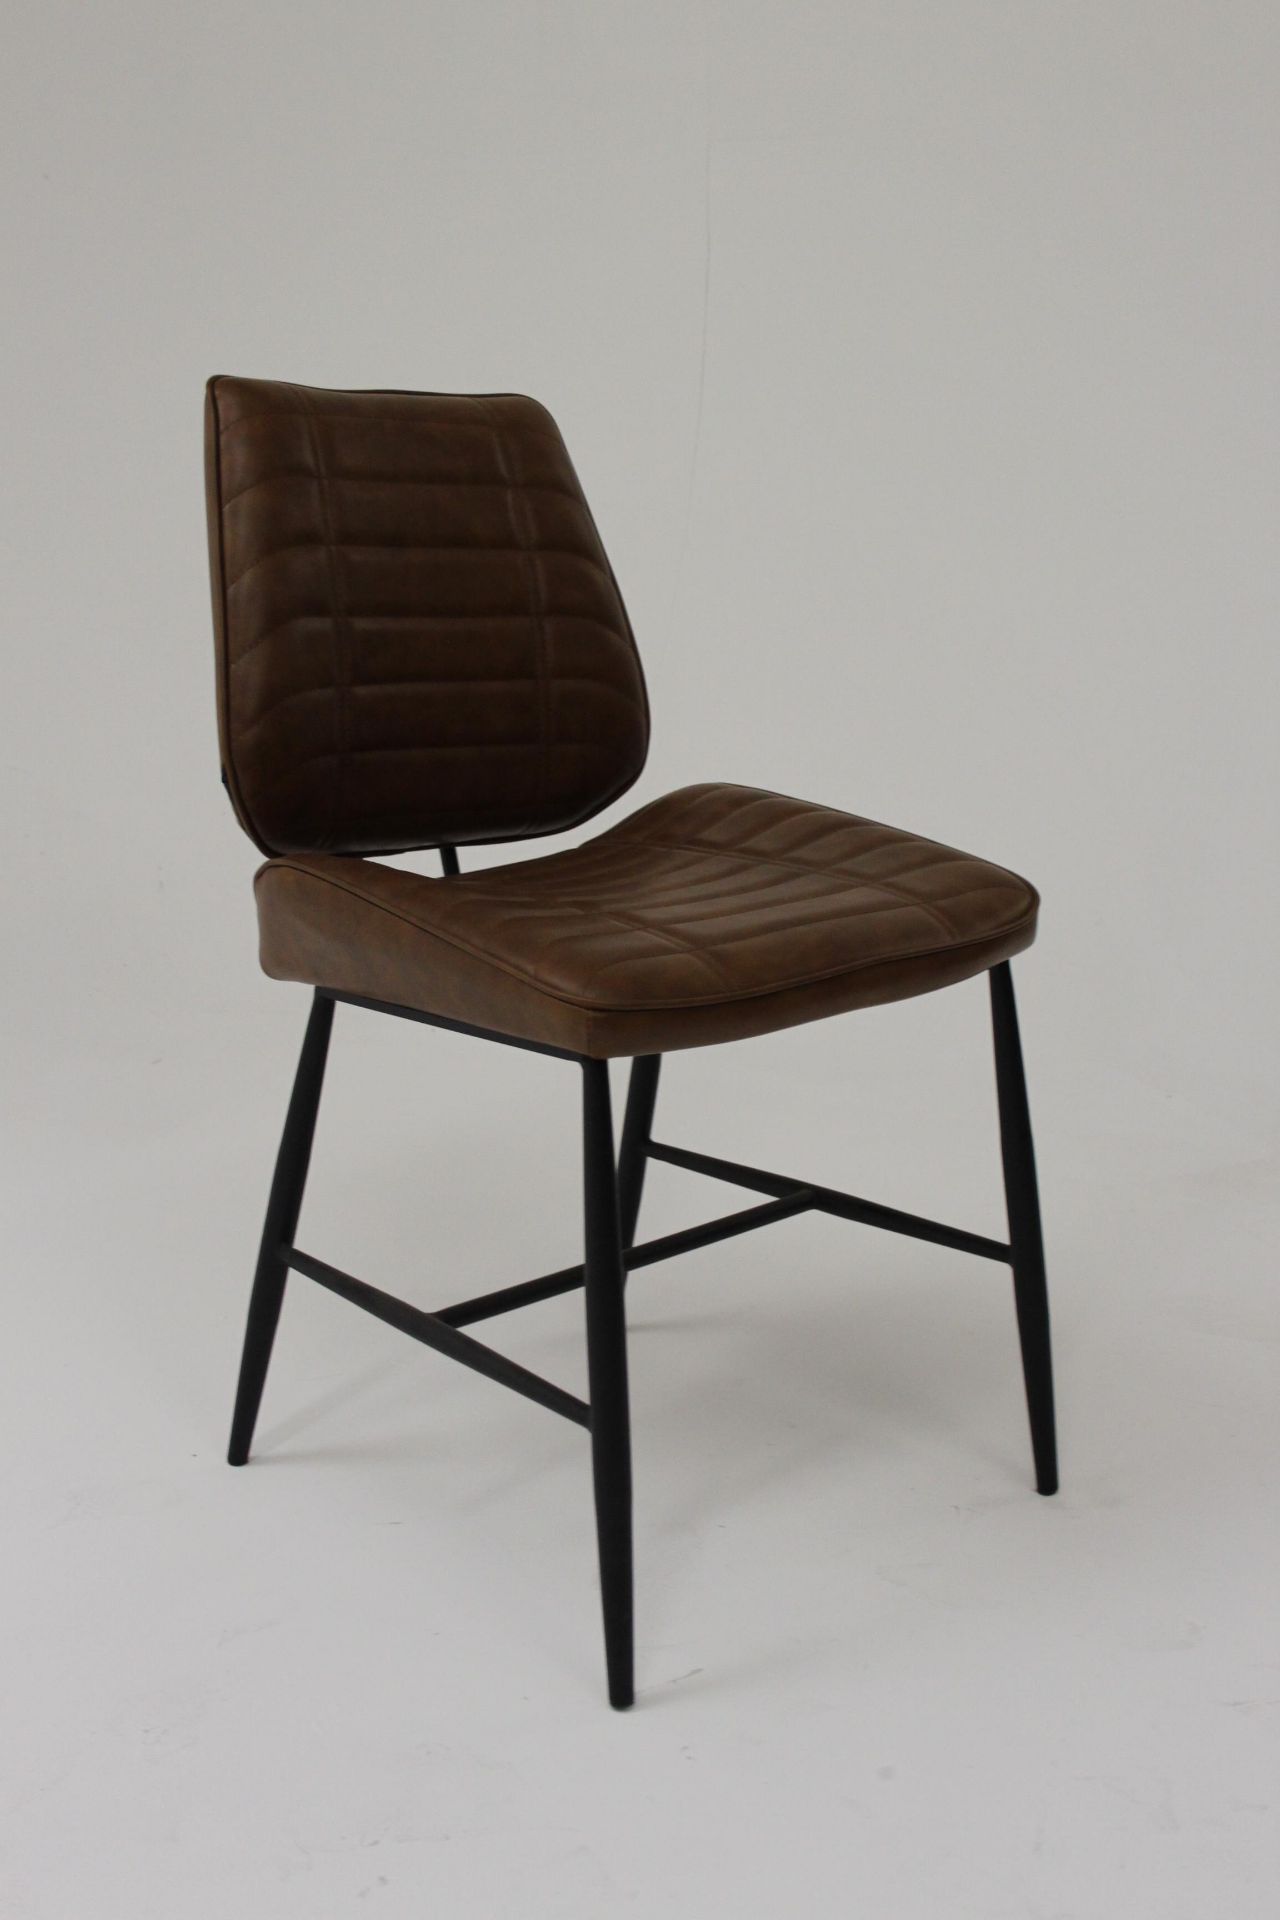 Cortina Chair Tan Inspired By Classic Car Seat Design These Chairs A Modern Stylish Appeal High - Image 3 of 5